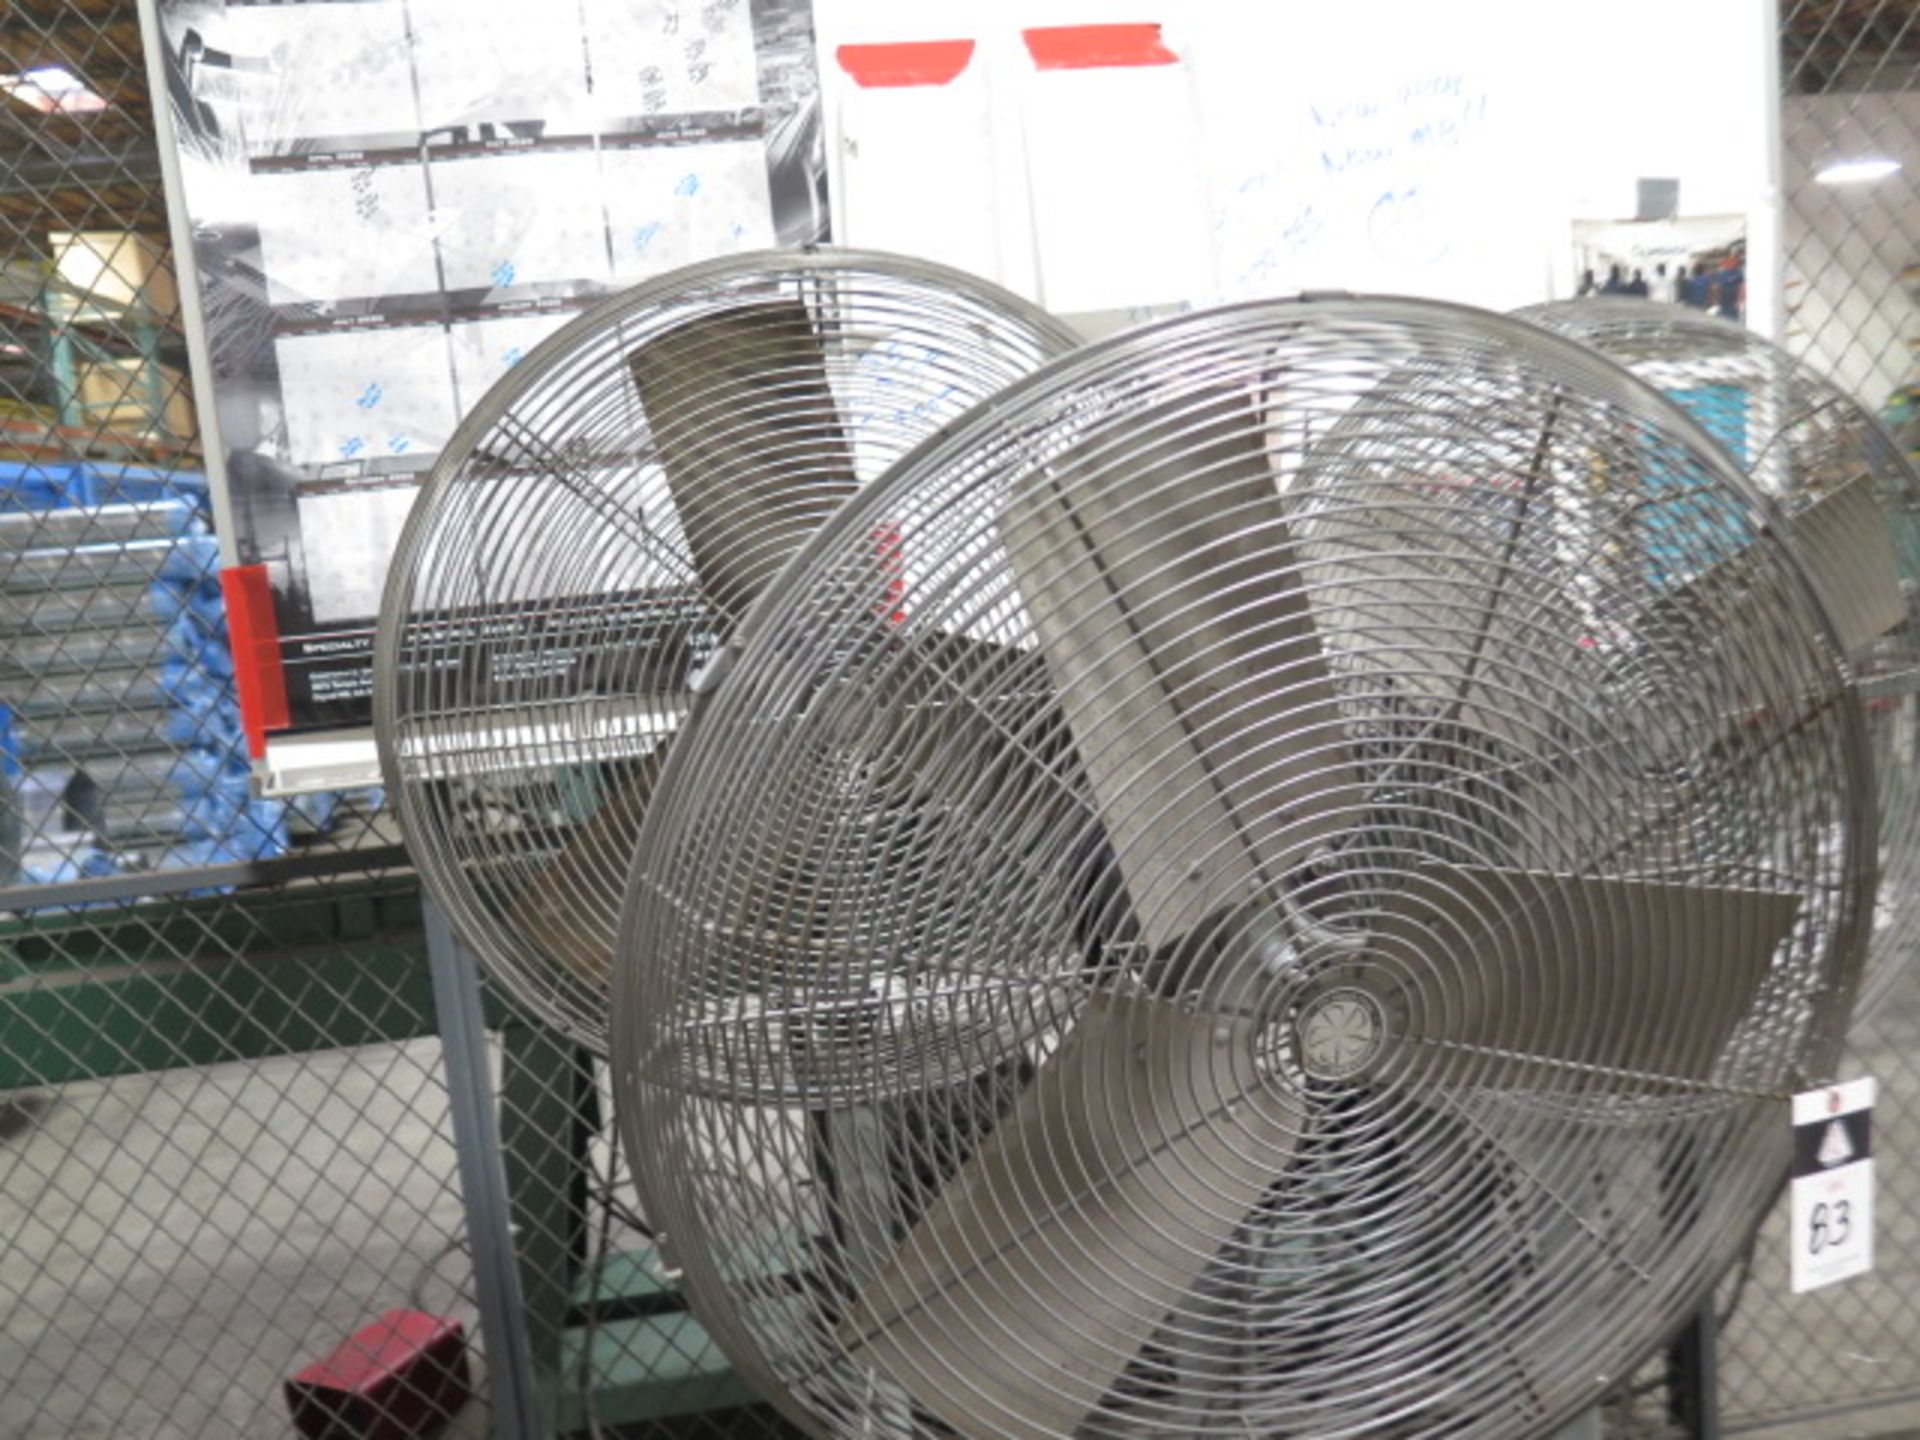 Shop Fans (3) (SOLD AS-IS - NO WARRANTY) - Image 3 of 4